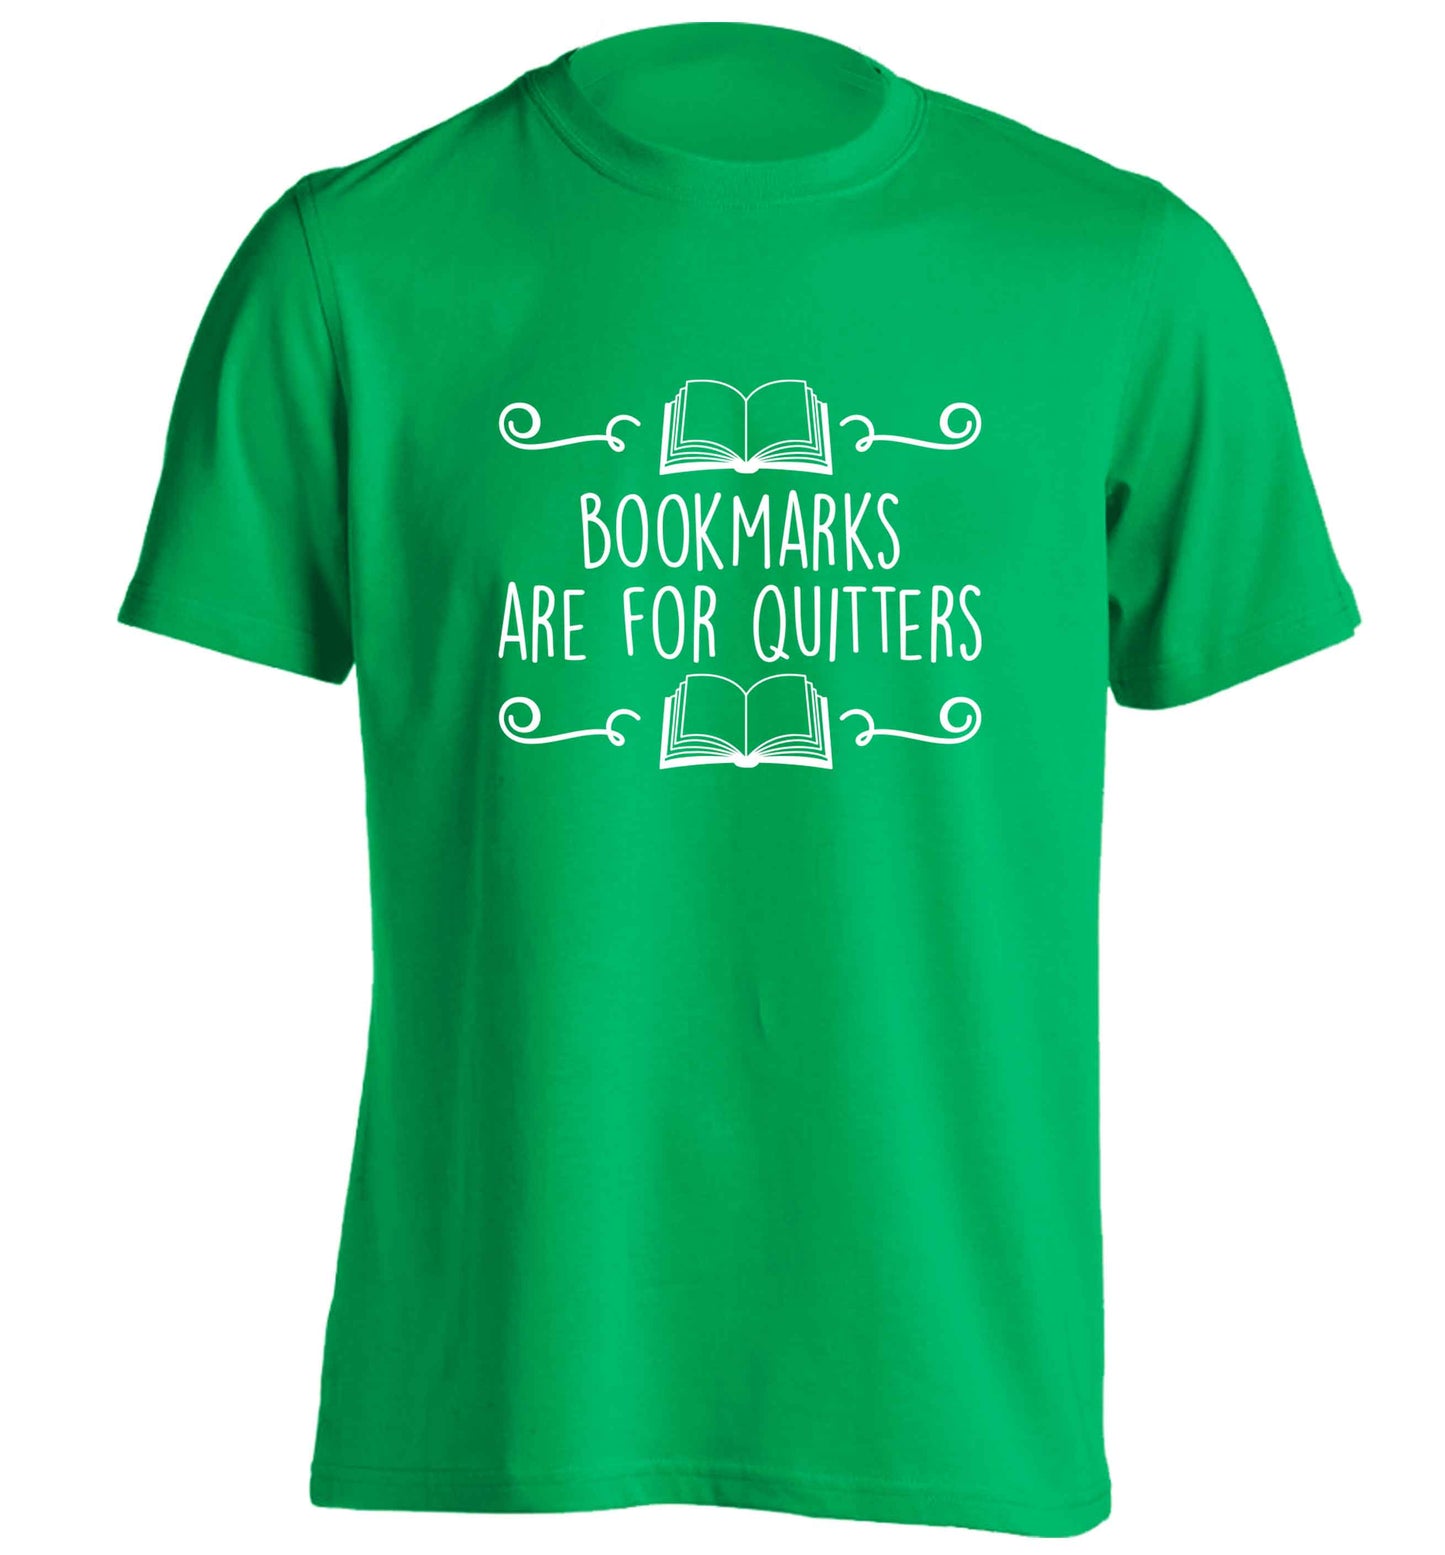 Bookmarks are for quitters adults unisex green Tshirt 2XL